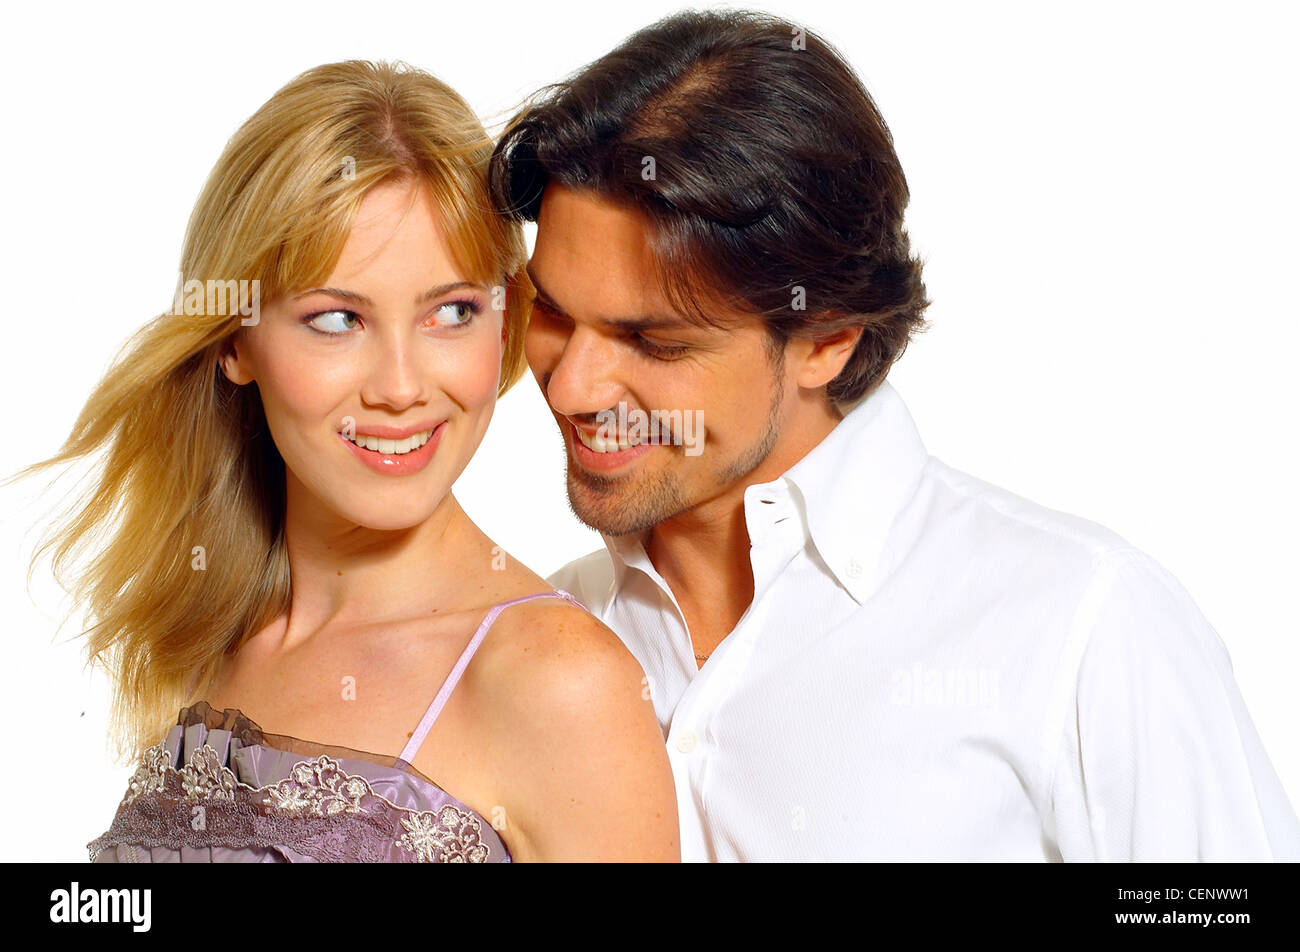 Female long blonde hair wearing lilac sleeveless top standing against male dark hair wearing white shirt looking at her Stock Photo